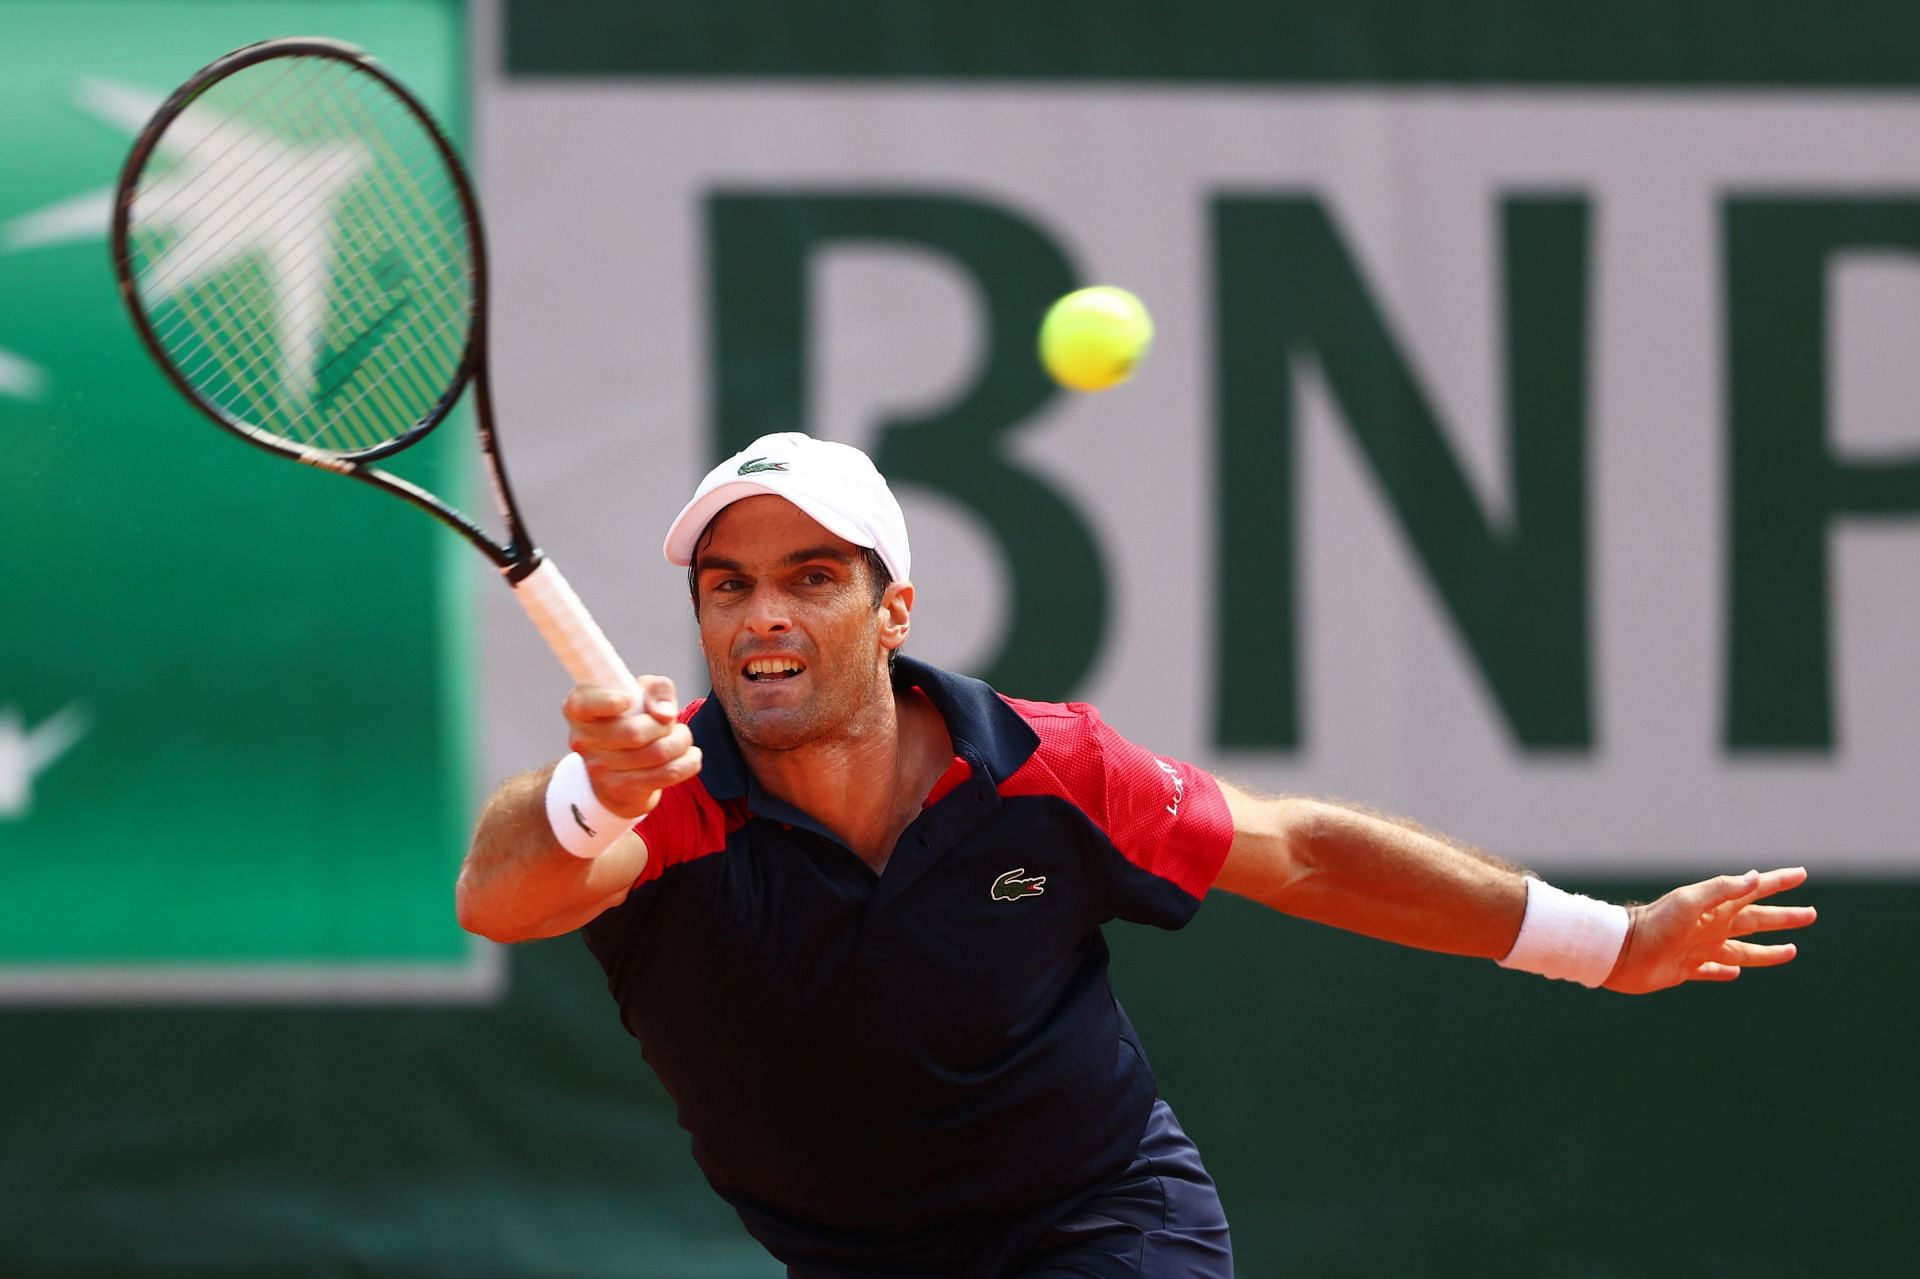 Pablo Andujar at the 2021 French Open